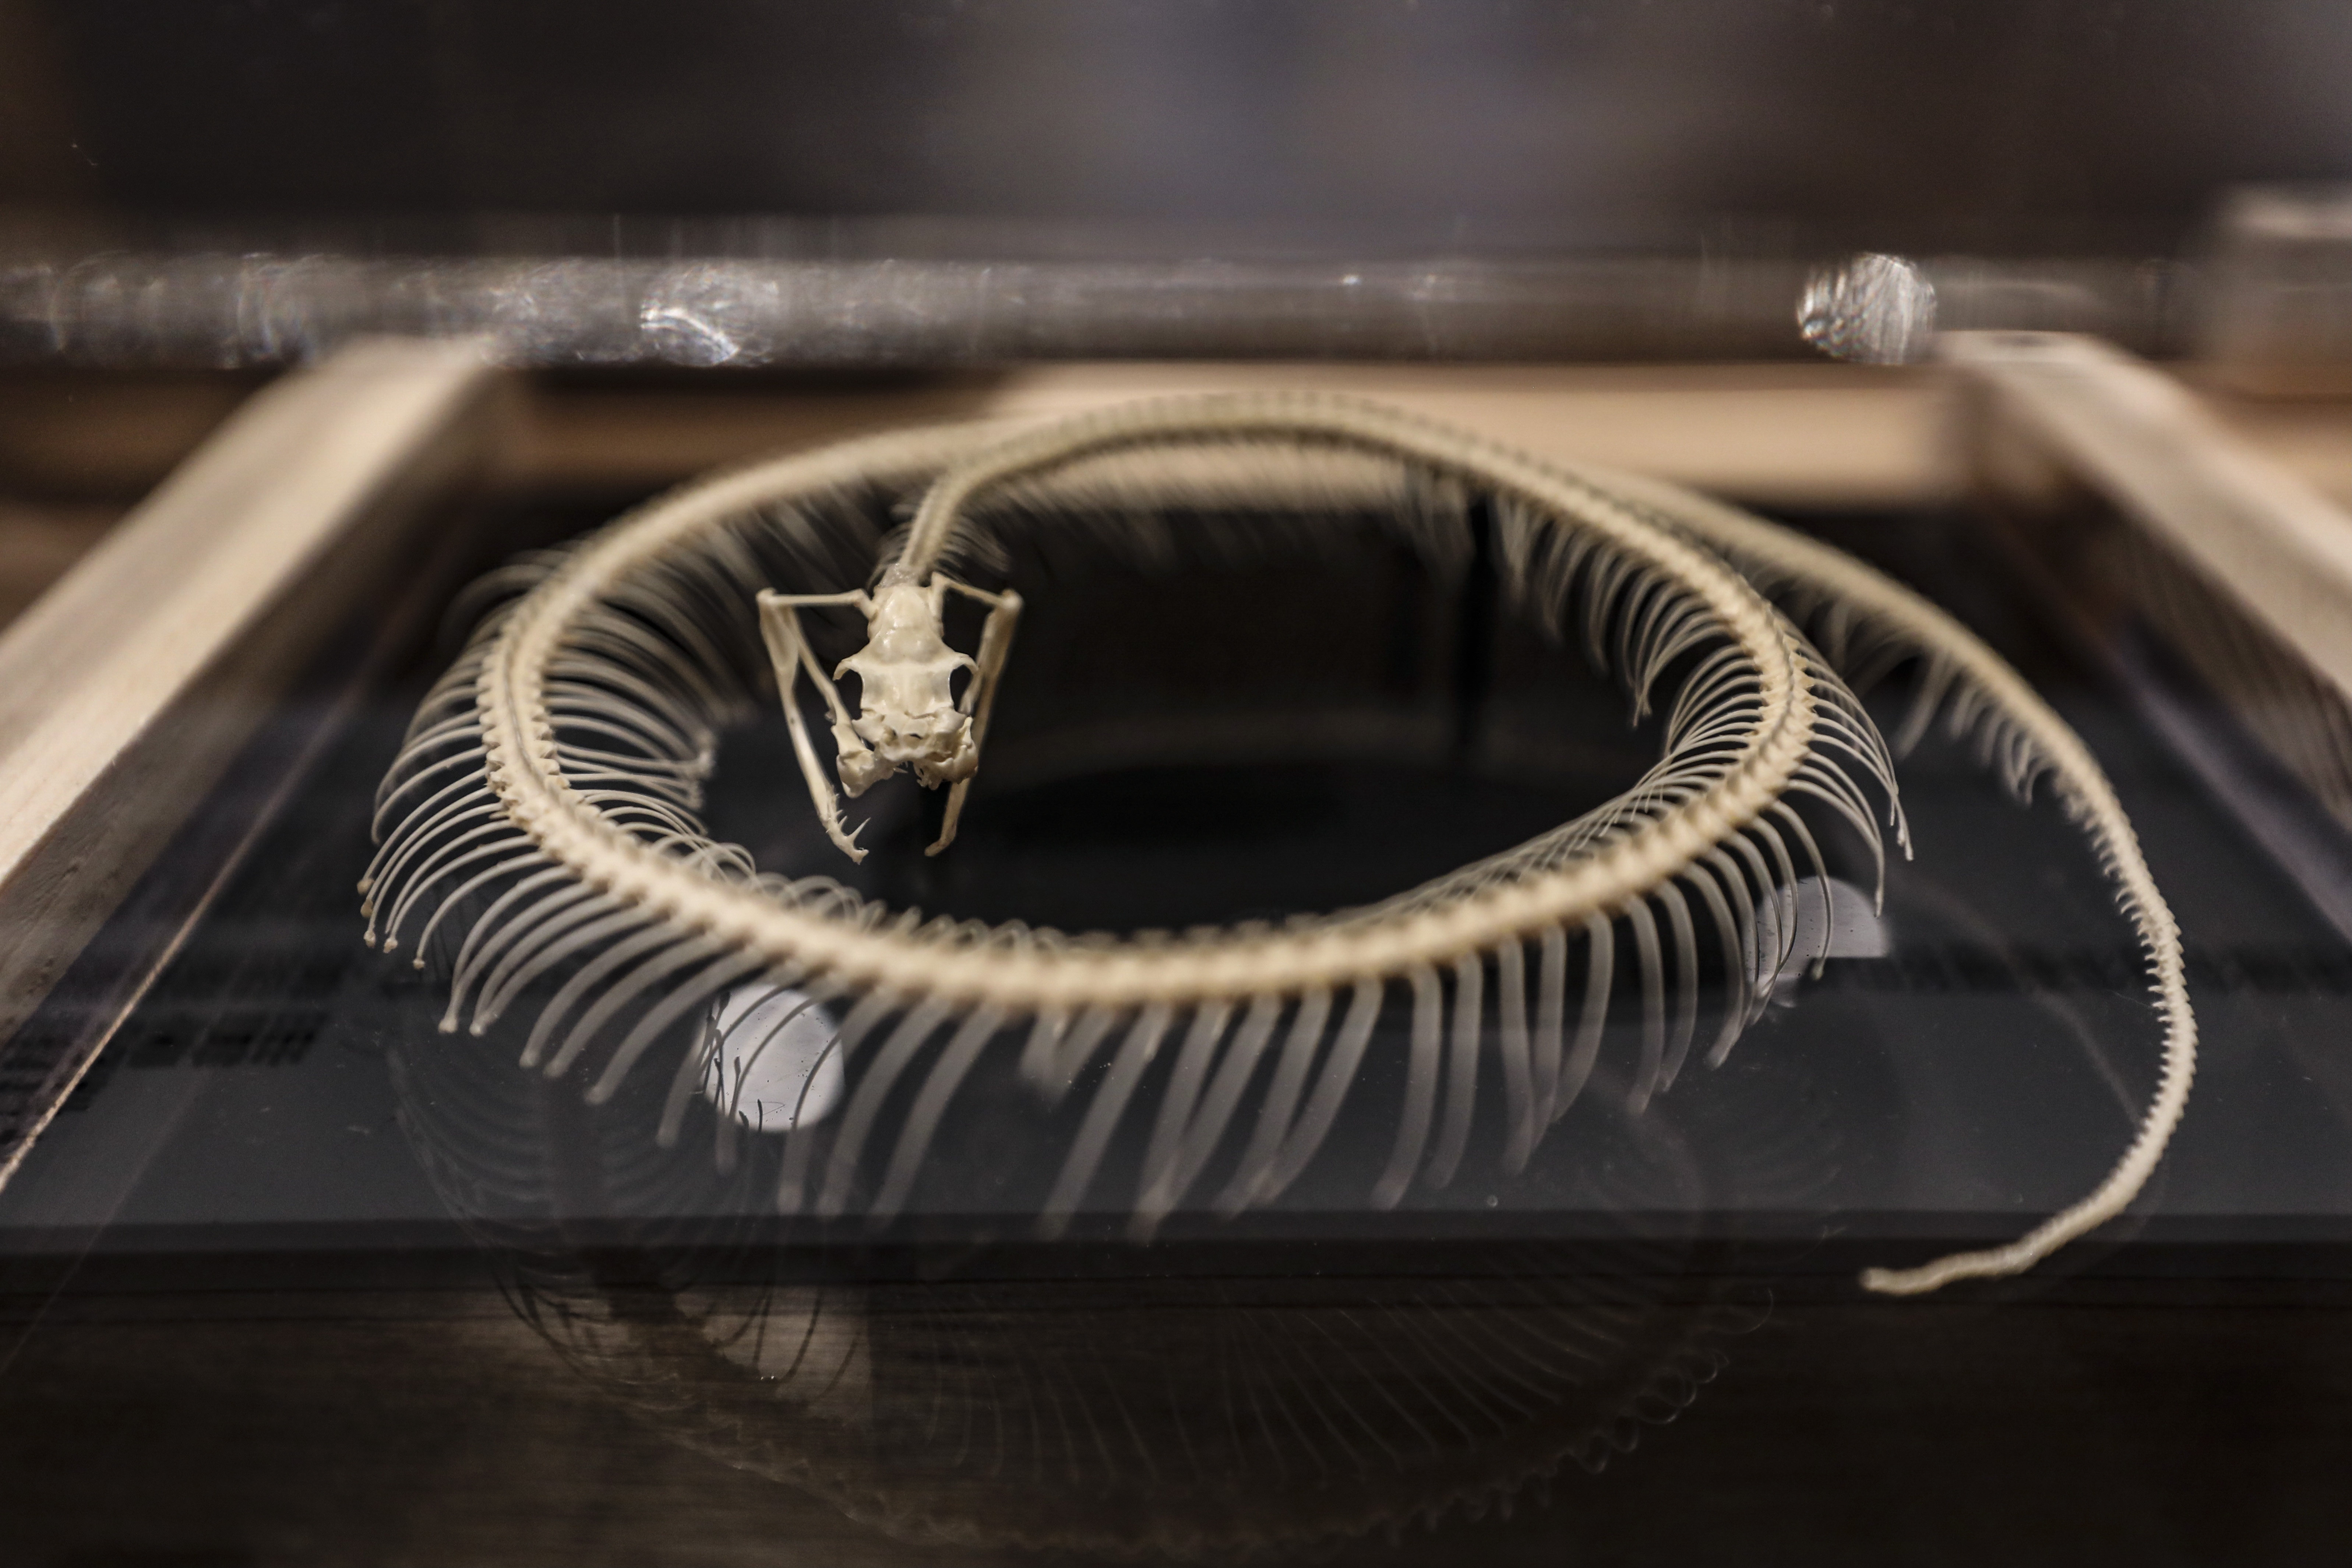 A snake skeleton on display as part of the “Ecology in the Making (1816-present)” exhibition at the Hong Kong Science Museum, in Tsim Sha Tsui. Photo: SCMP/ Xiaomei Chen